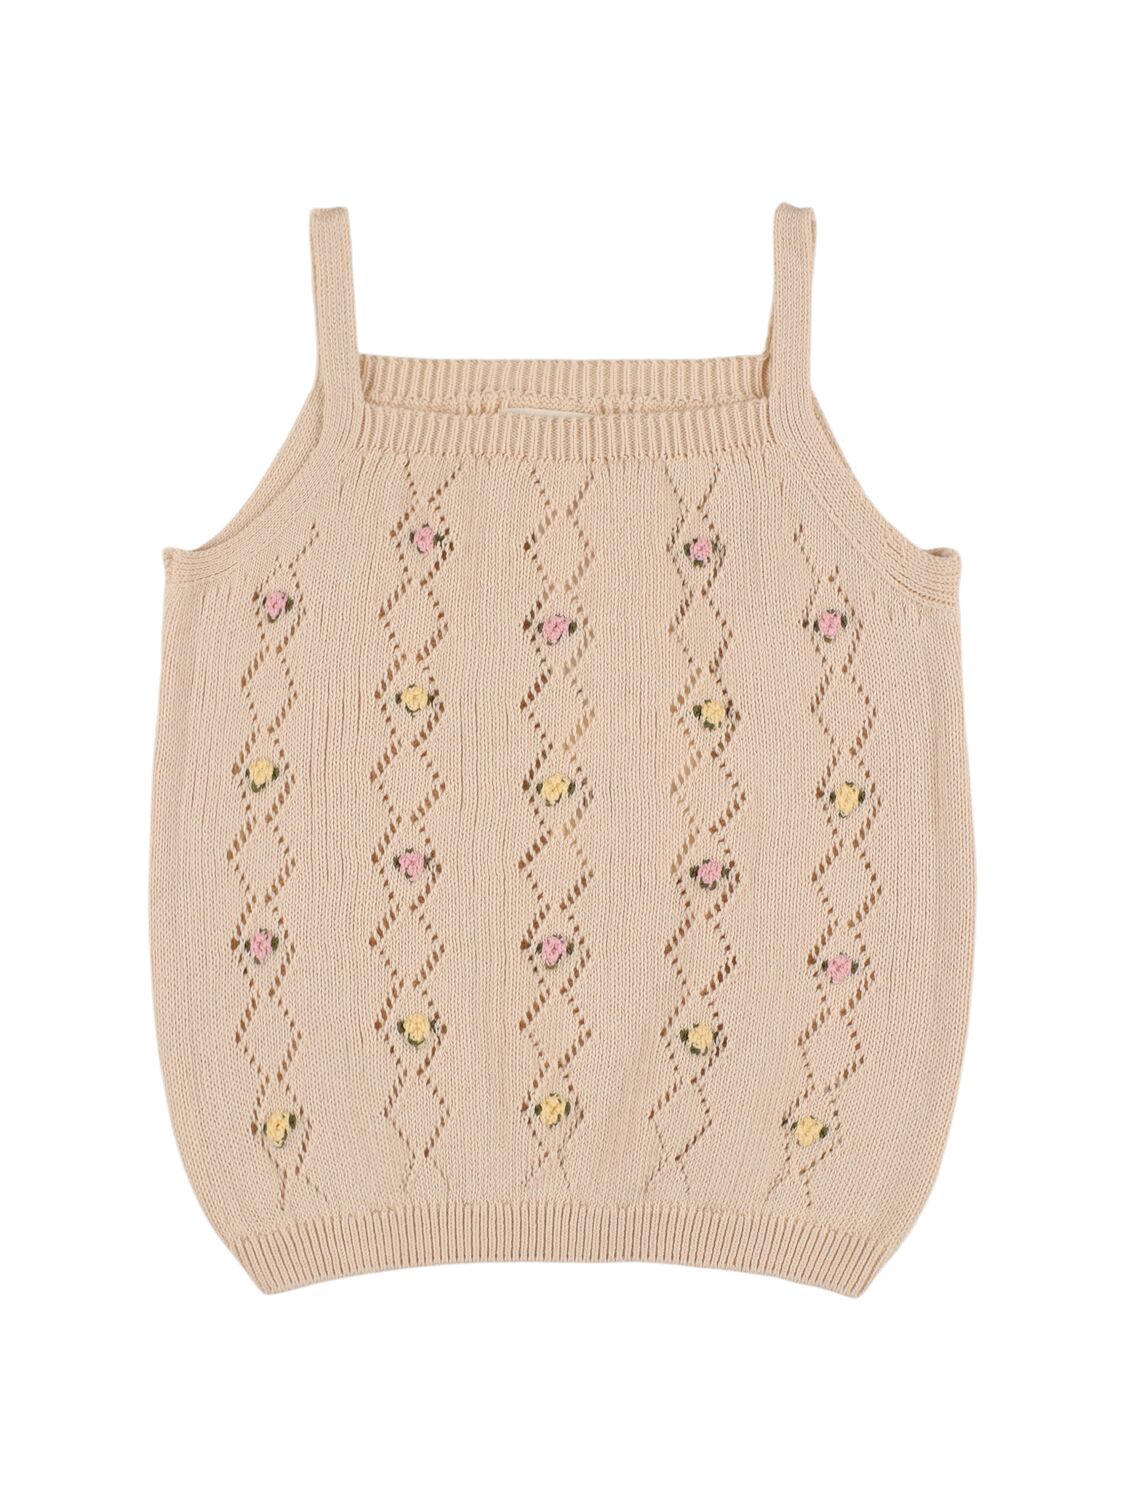 Image of Organic Cotton Knit Top